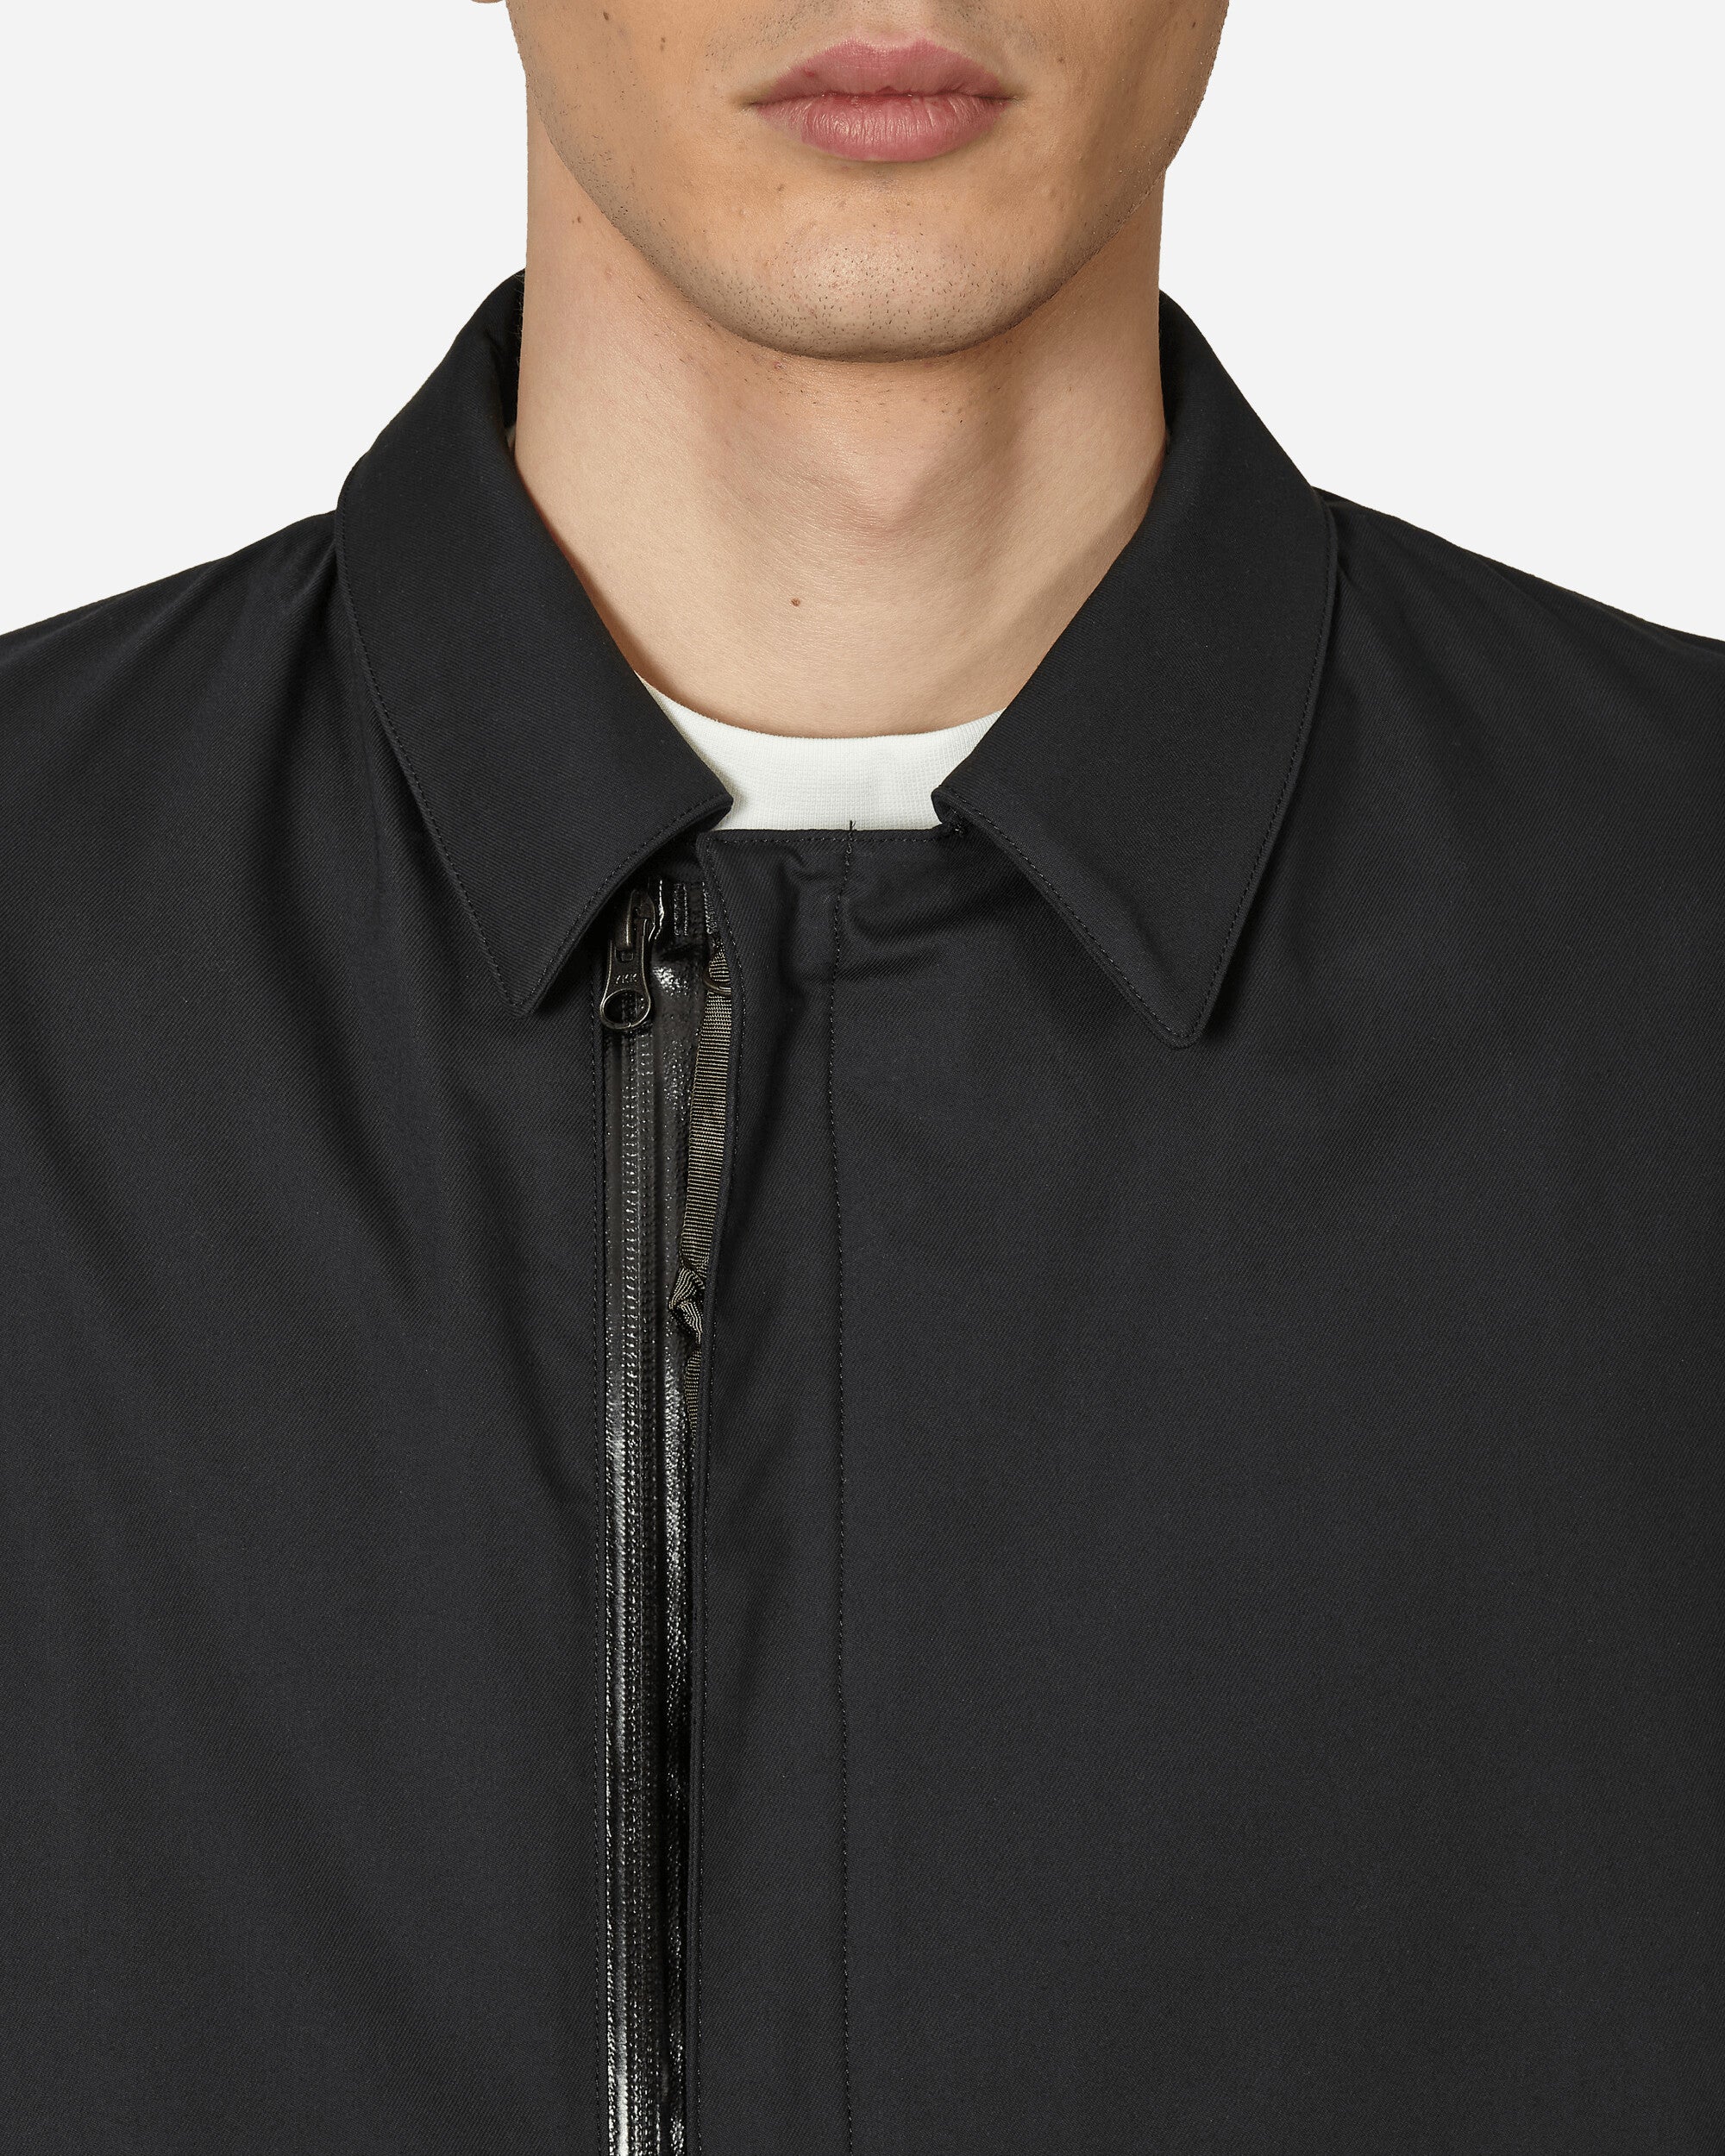 Acronym Micro Twill Tec Sys Jacket Black - Slam Jam Official Store